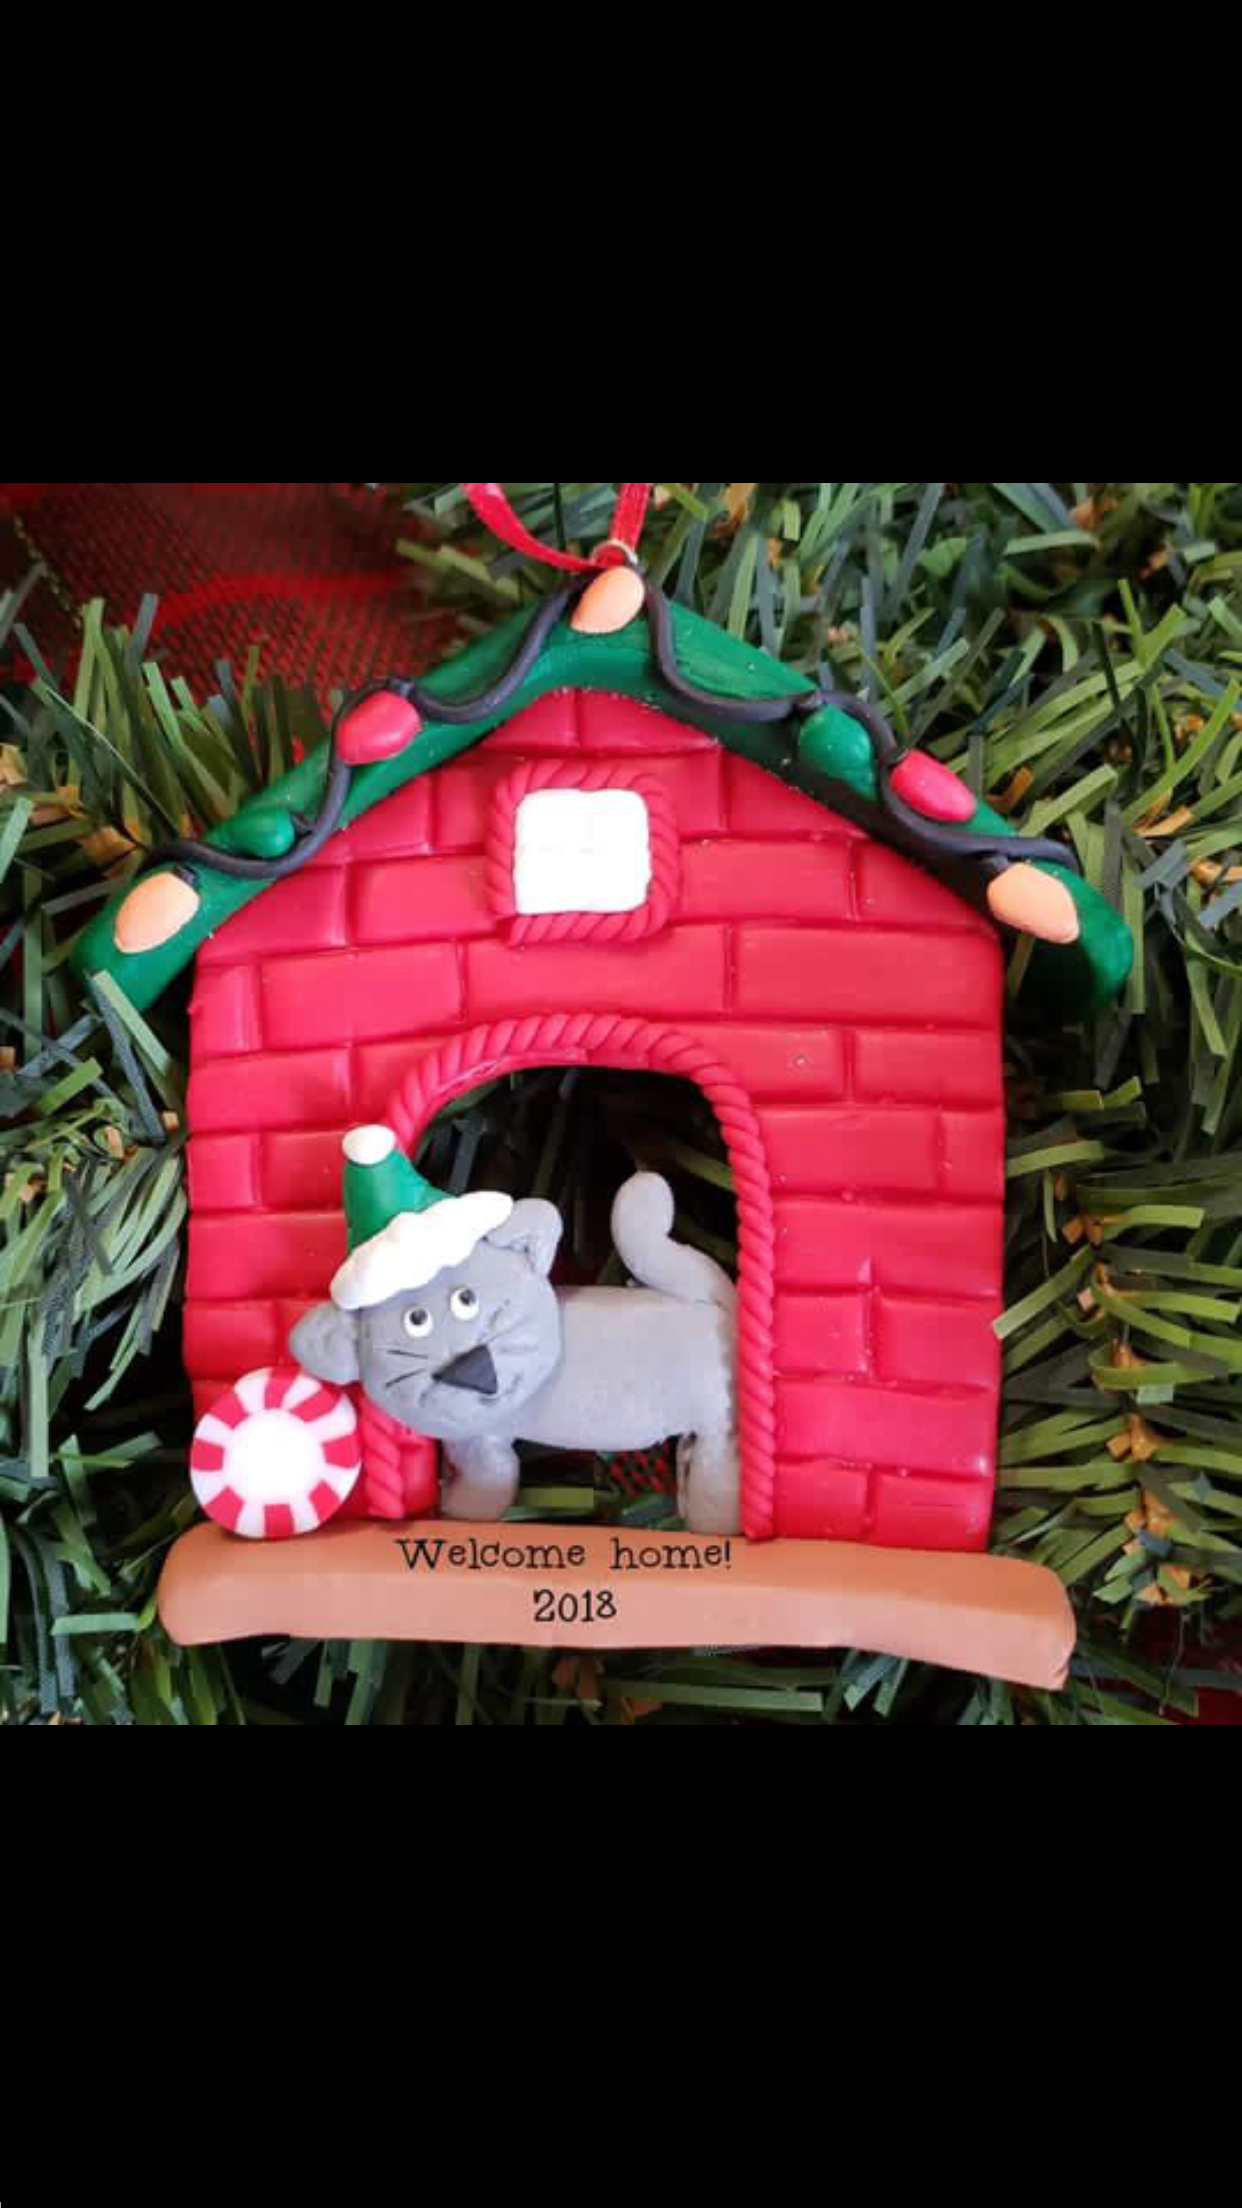 Cat by fireplace ornament